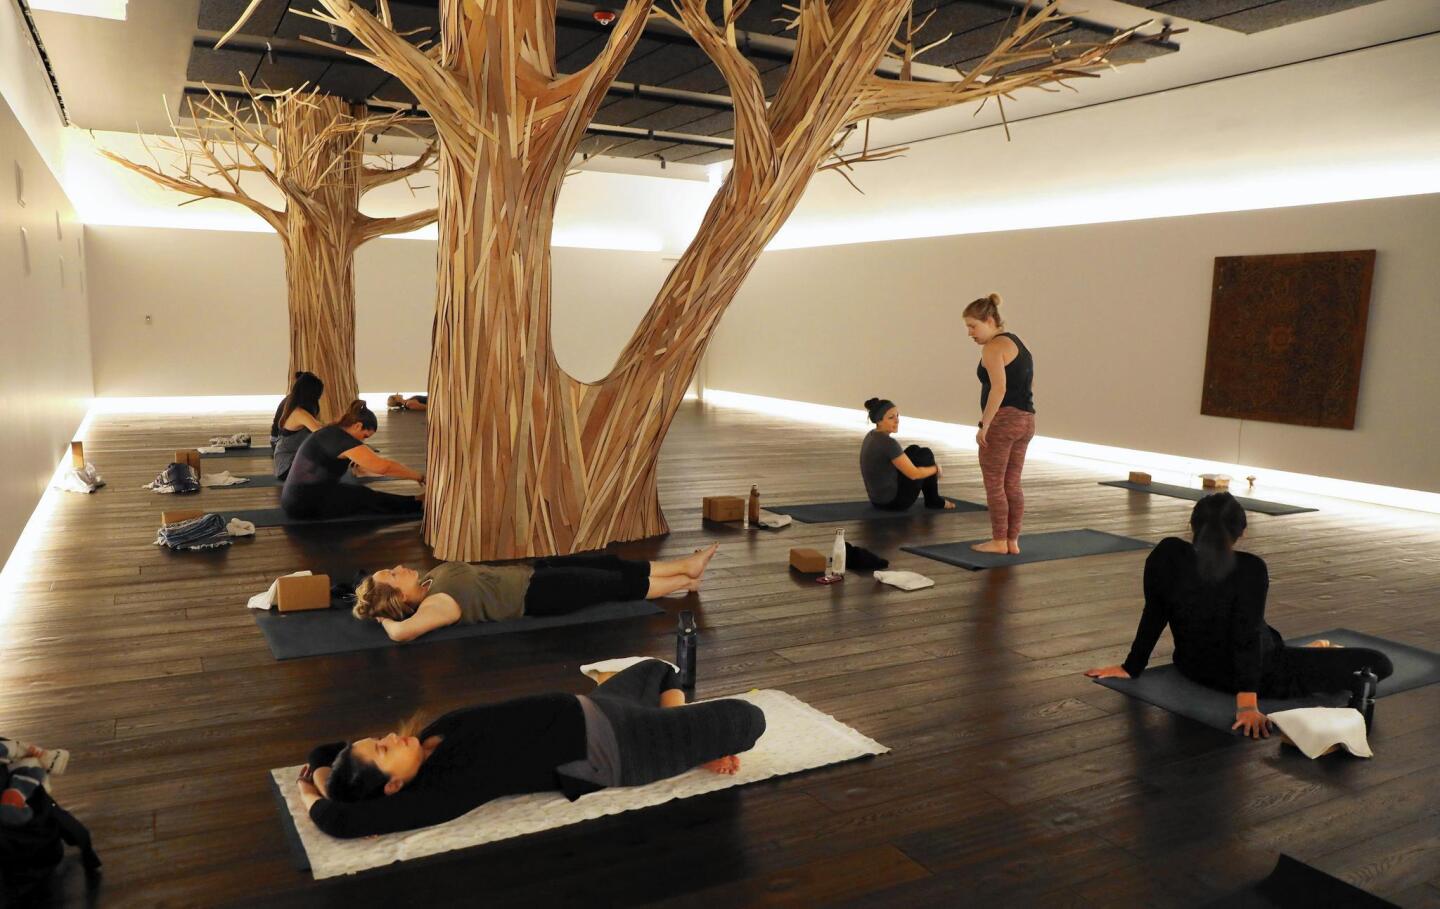 A space for yoga at the Midtown Athletic Club, formerly the Midtown Tennis Club.